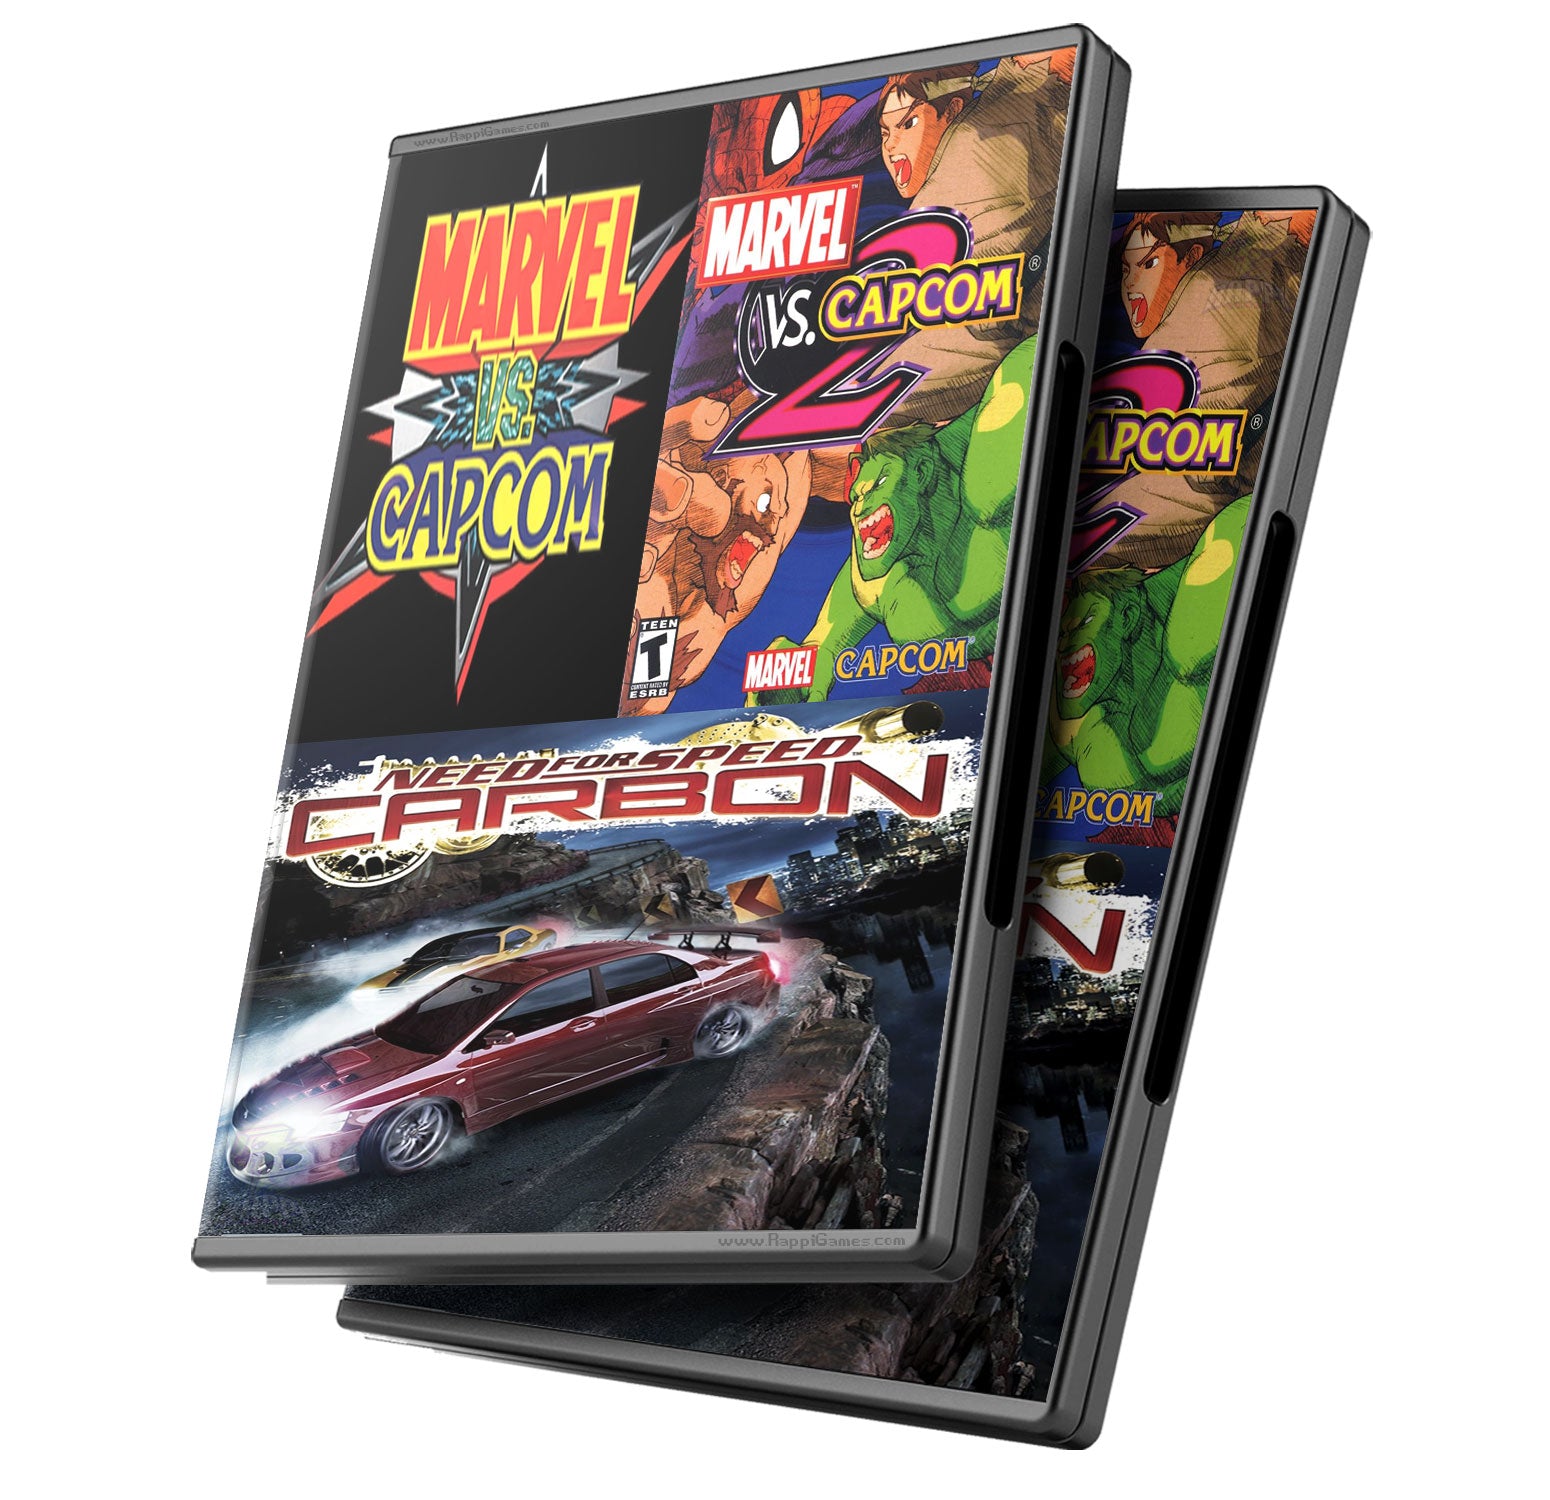 Marvel Vs Capcom 1 y 2 + Need For Speed Carbon - Pc